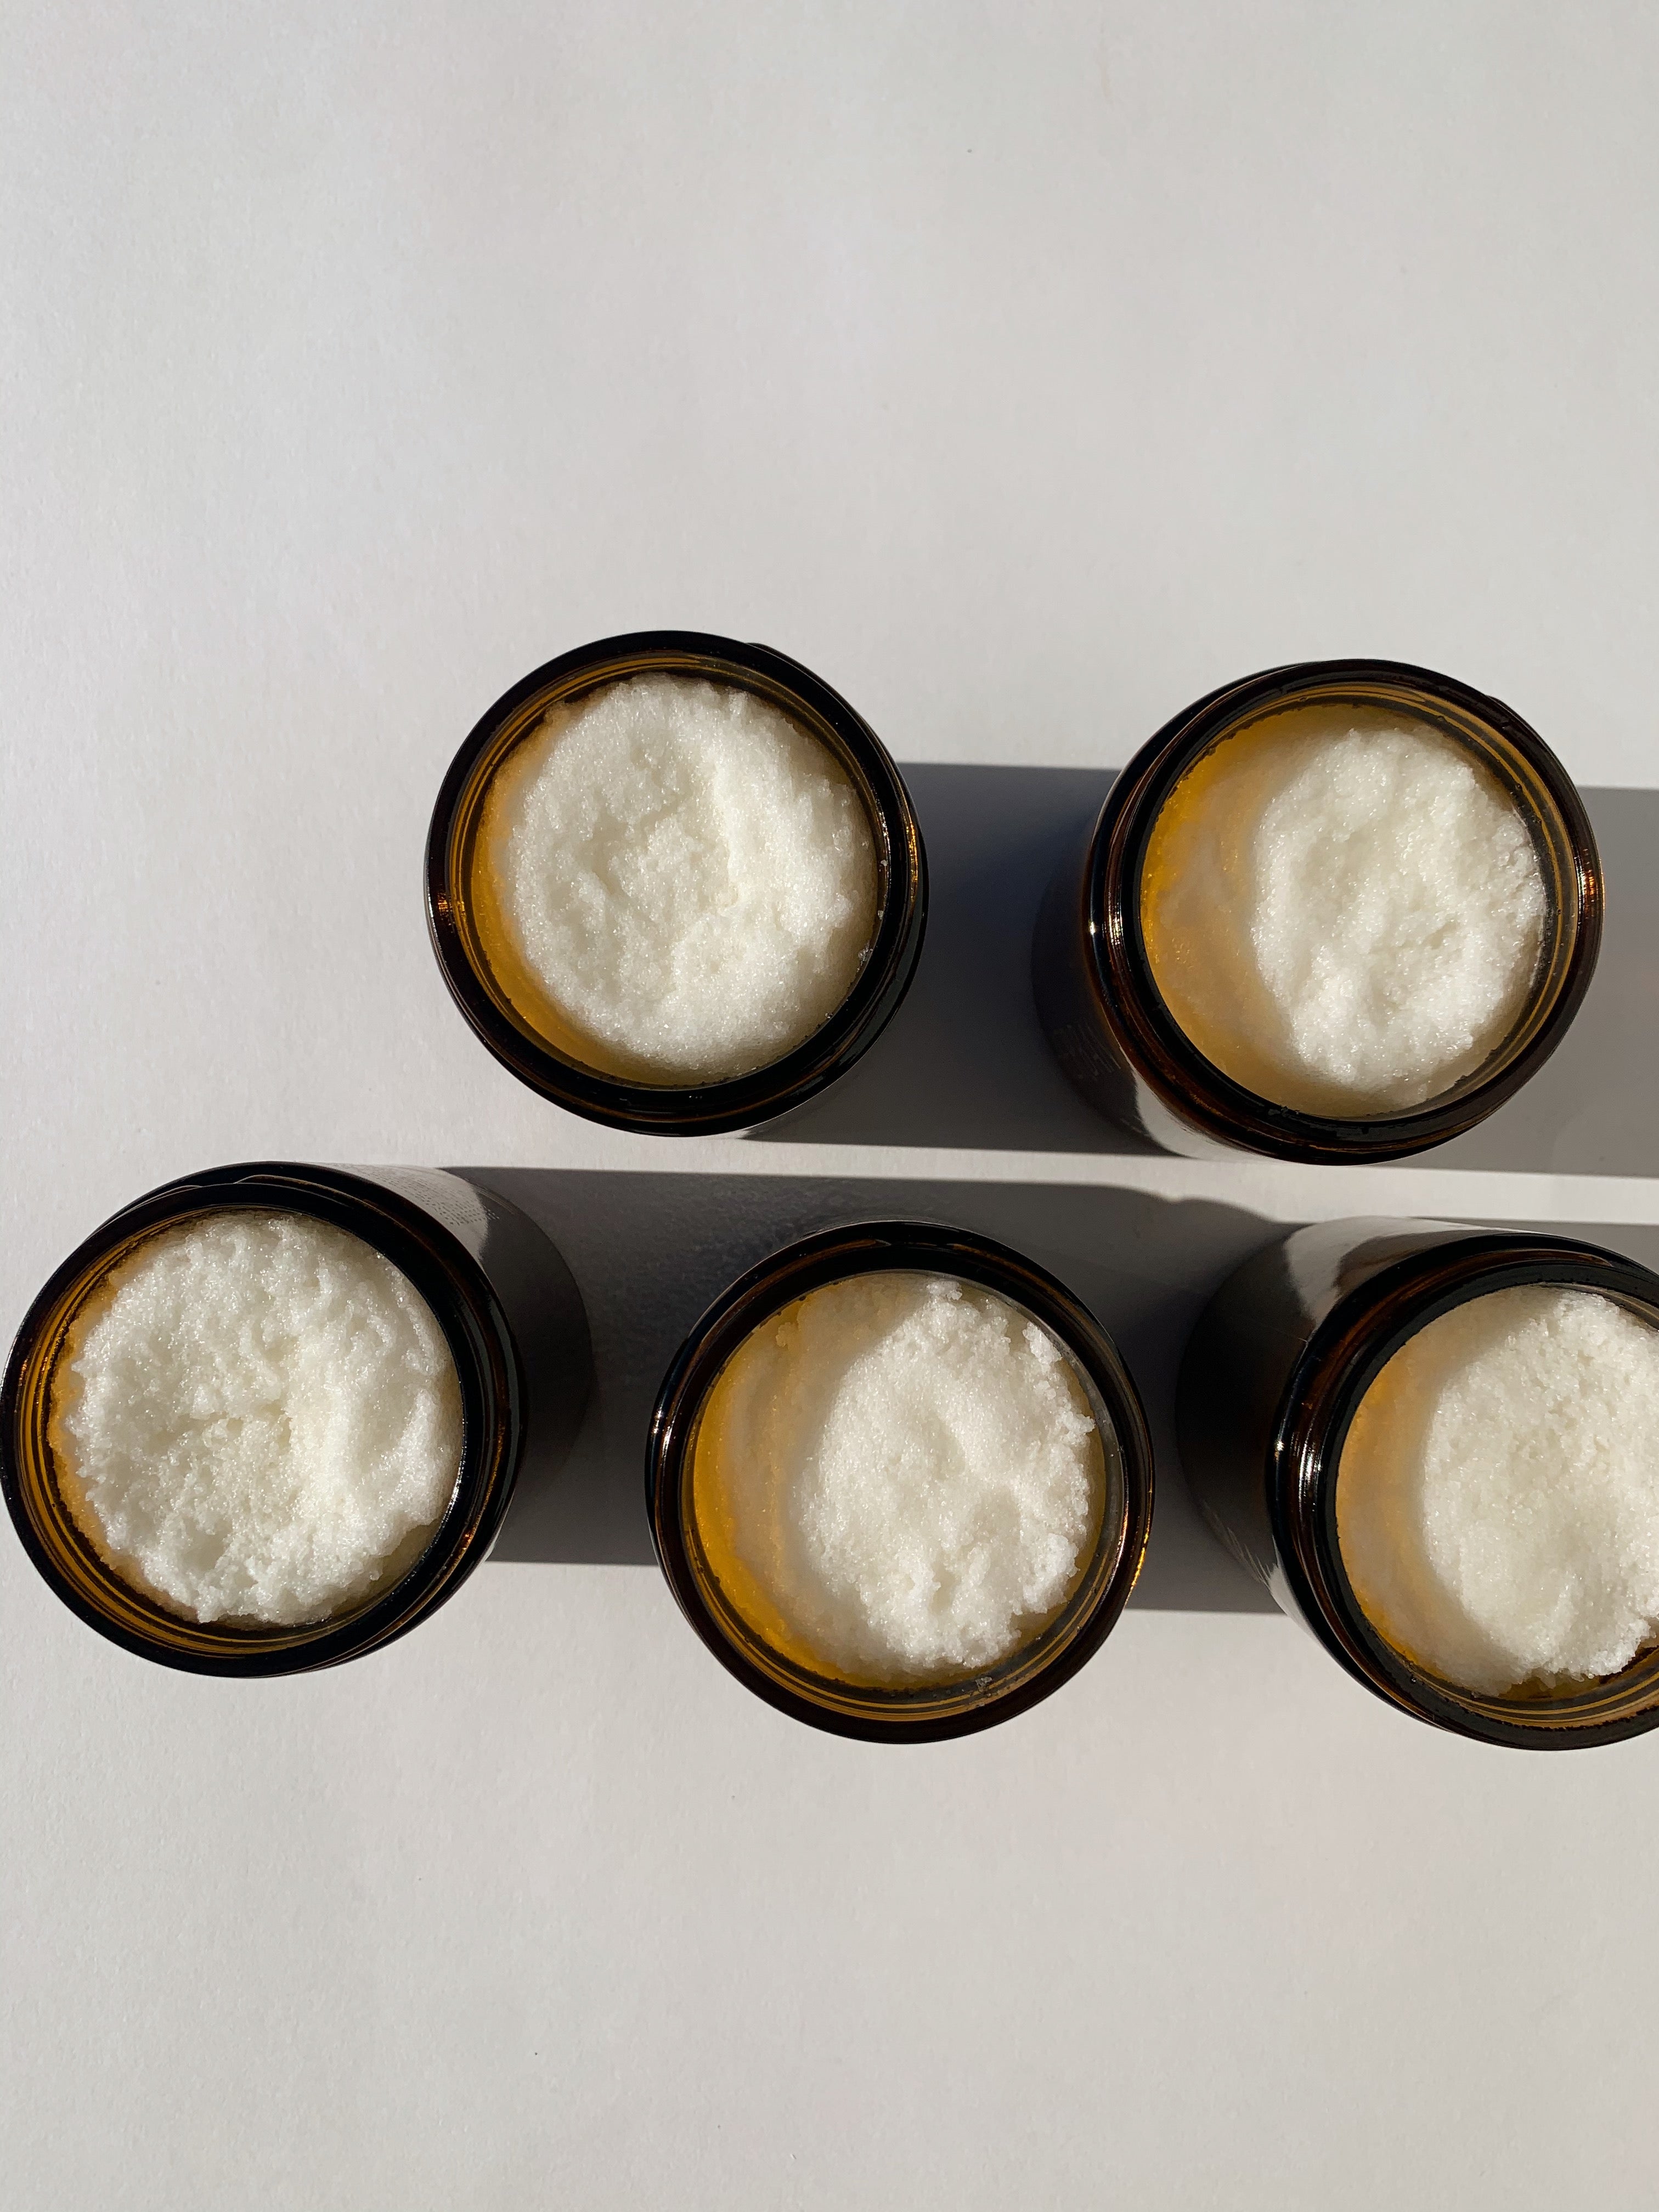 10oz creamy shea butter and sea salt body scrub beautifully packaged in amber glass jars that are printed with gold..